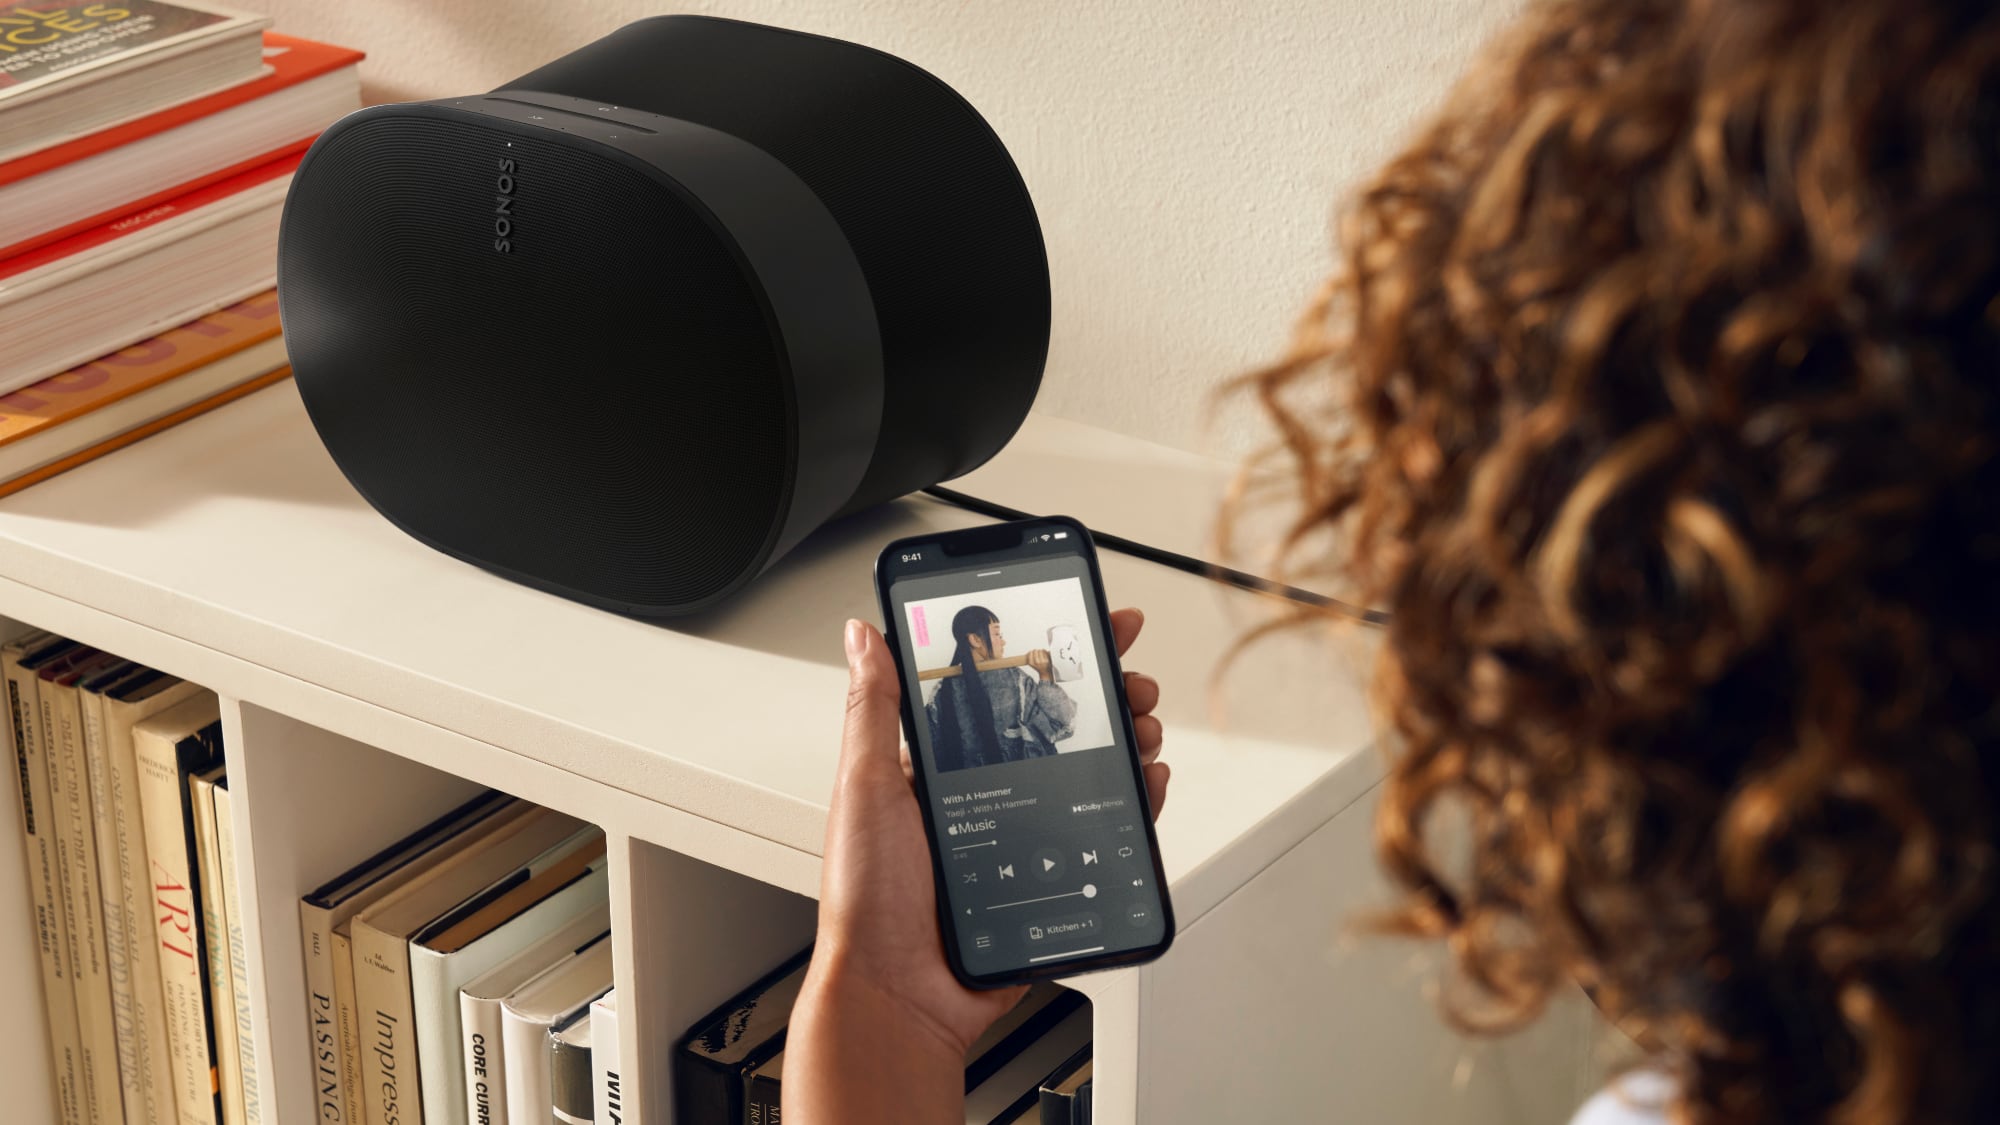 Sonos Launches Redesigned App With Customizable Home Screen For More Personalized Listening